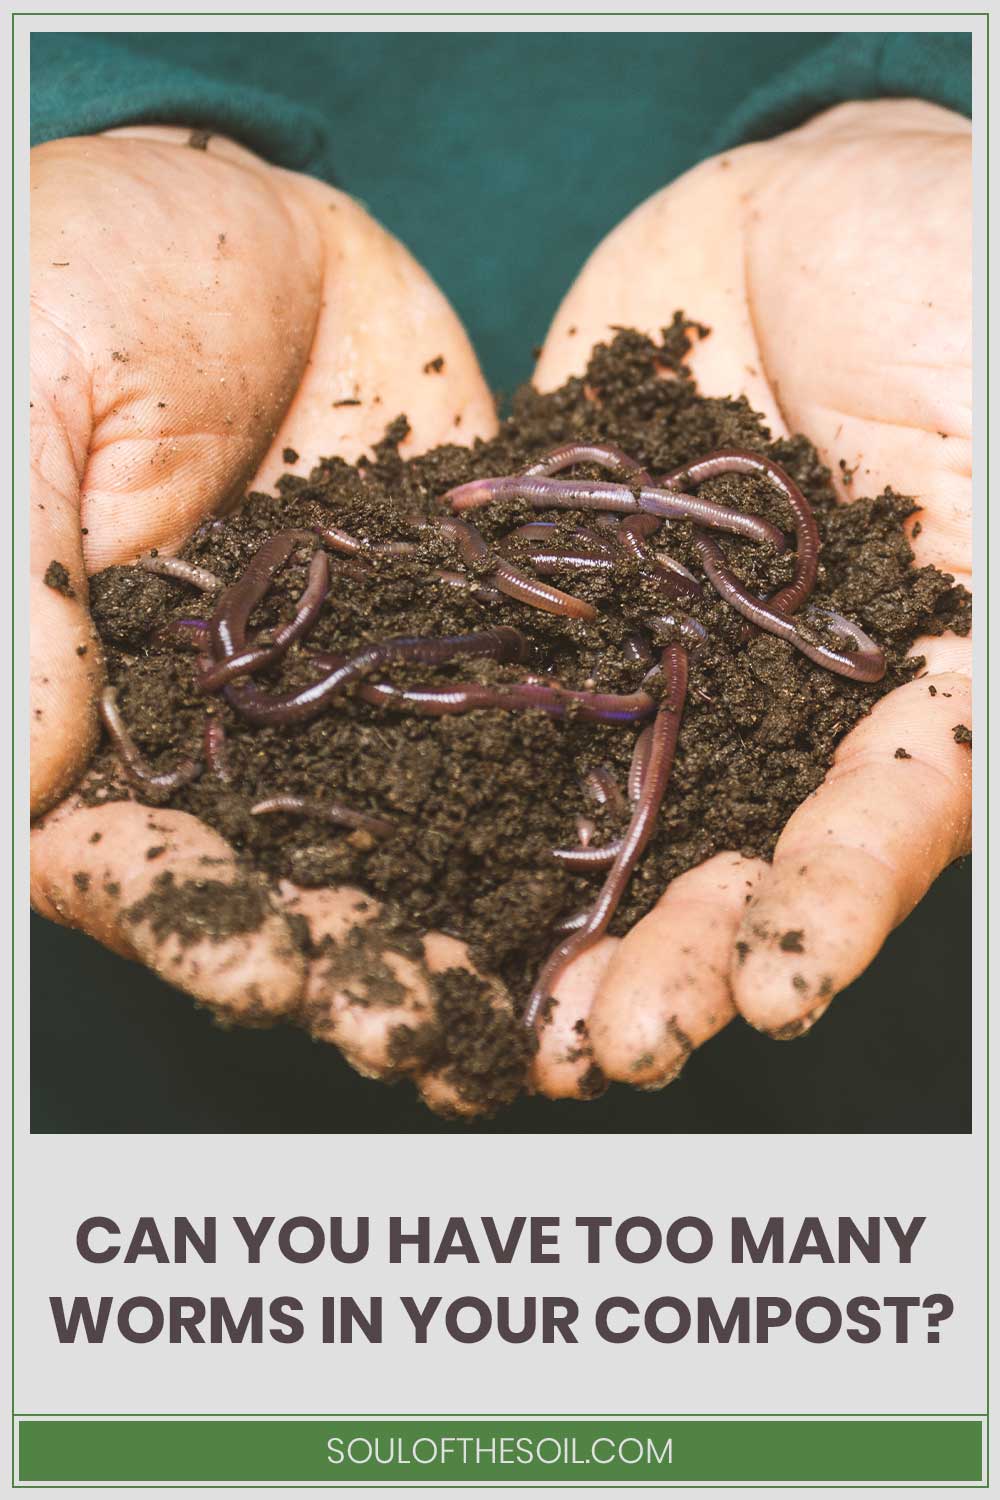 Can You Have Too Many Worms In Your Compost?